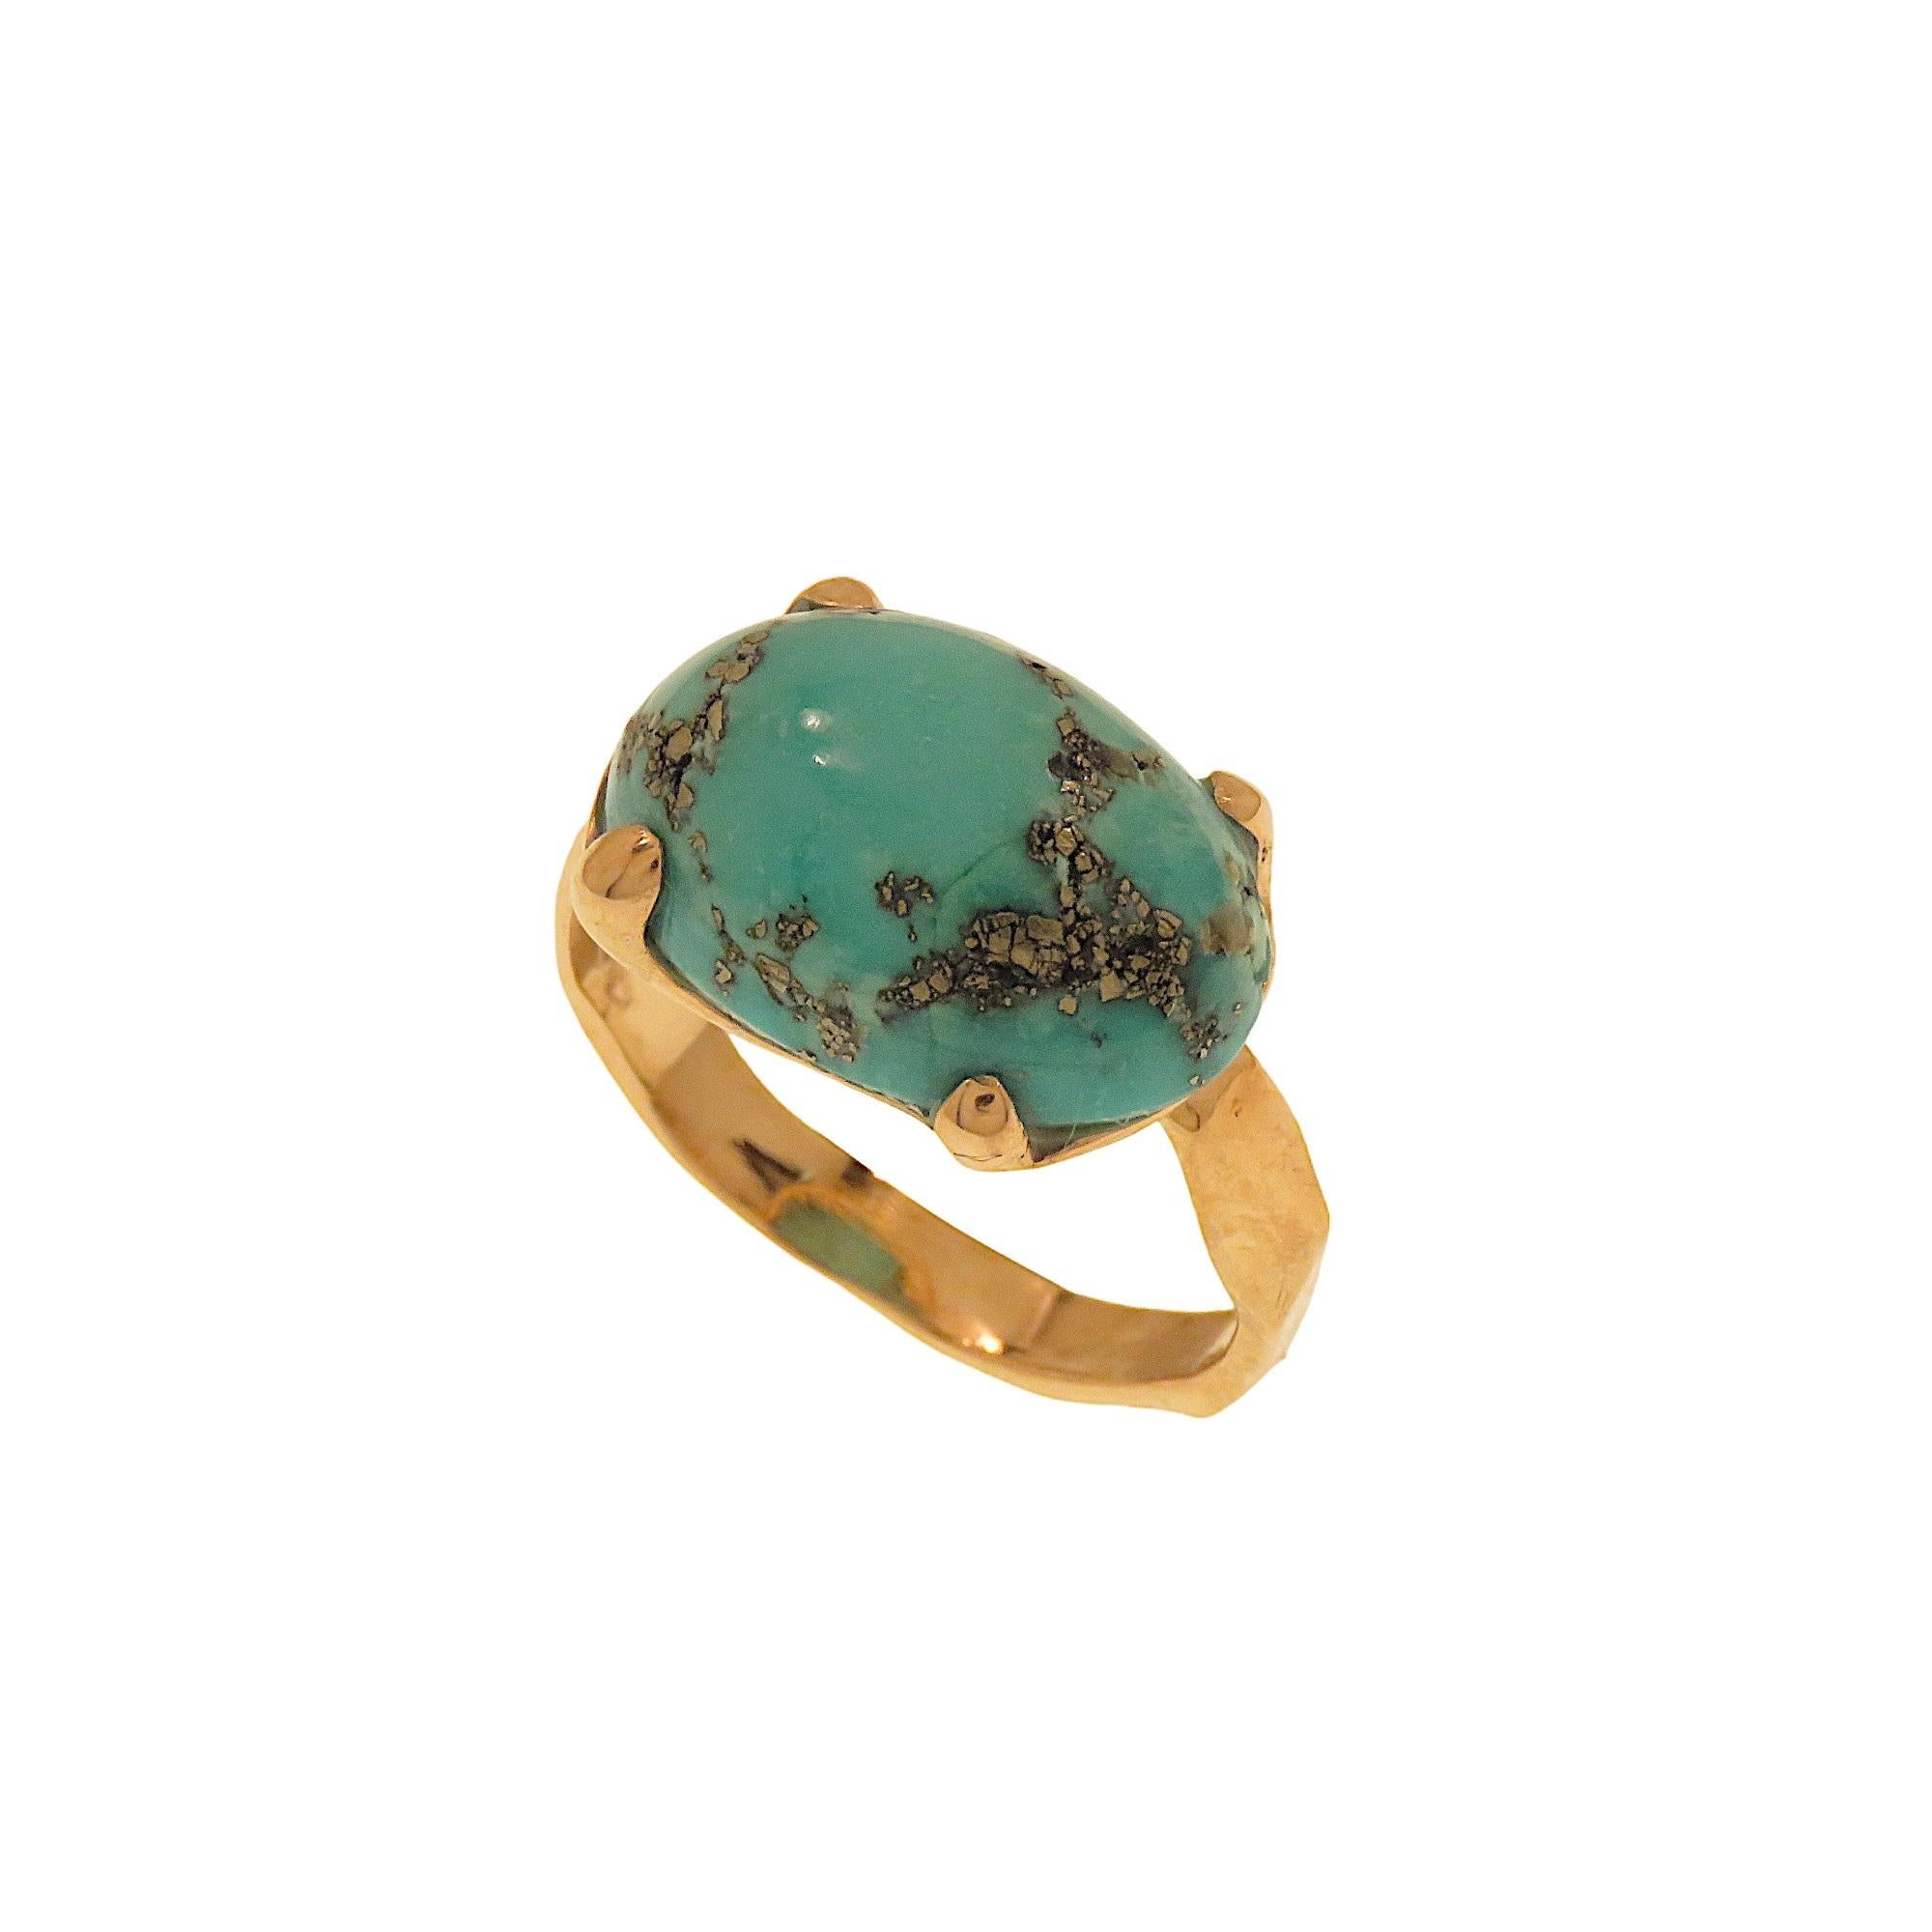 9K rose gold band ring with a cabochon-cut natural turquoise measuring 16x10 mm./0.629x0.393 and weighing 4.90 ct. The ring is handmade in our workshop in Milan Italy with a setting formed by a hammered wedding band and a 4-pronged griffe setting